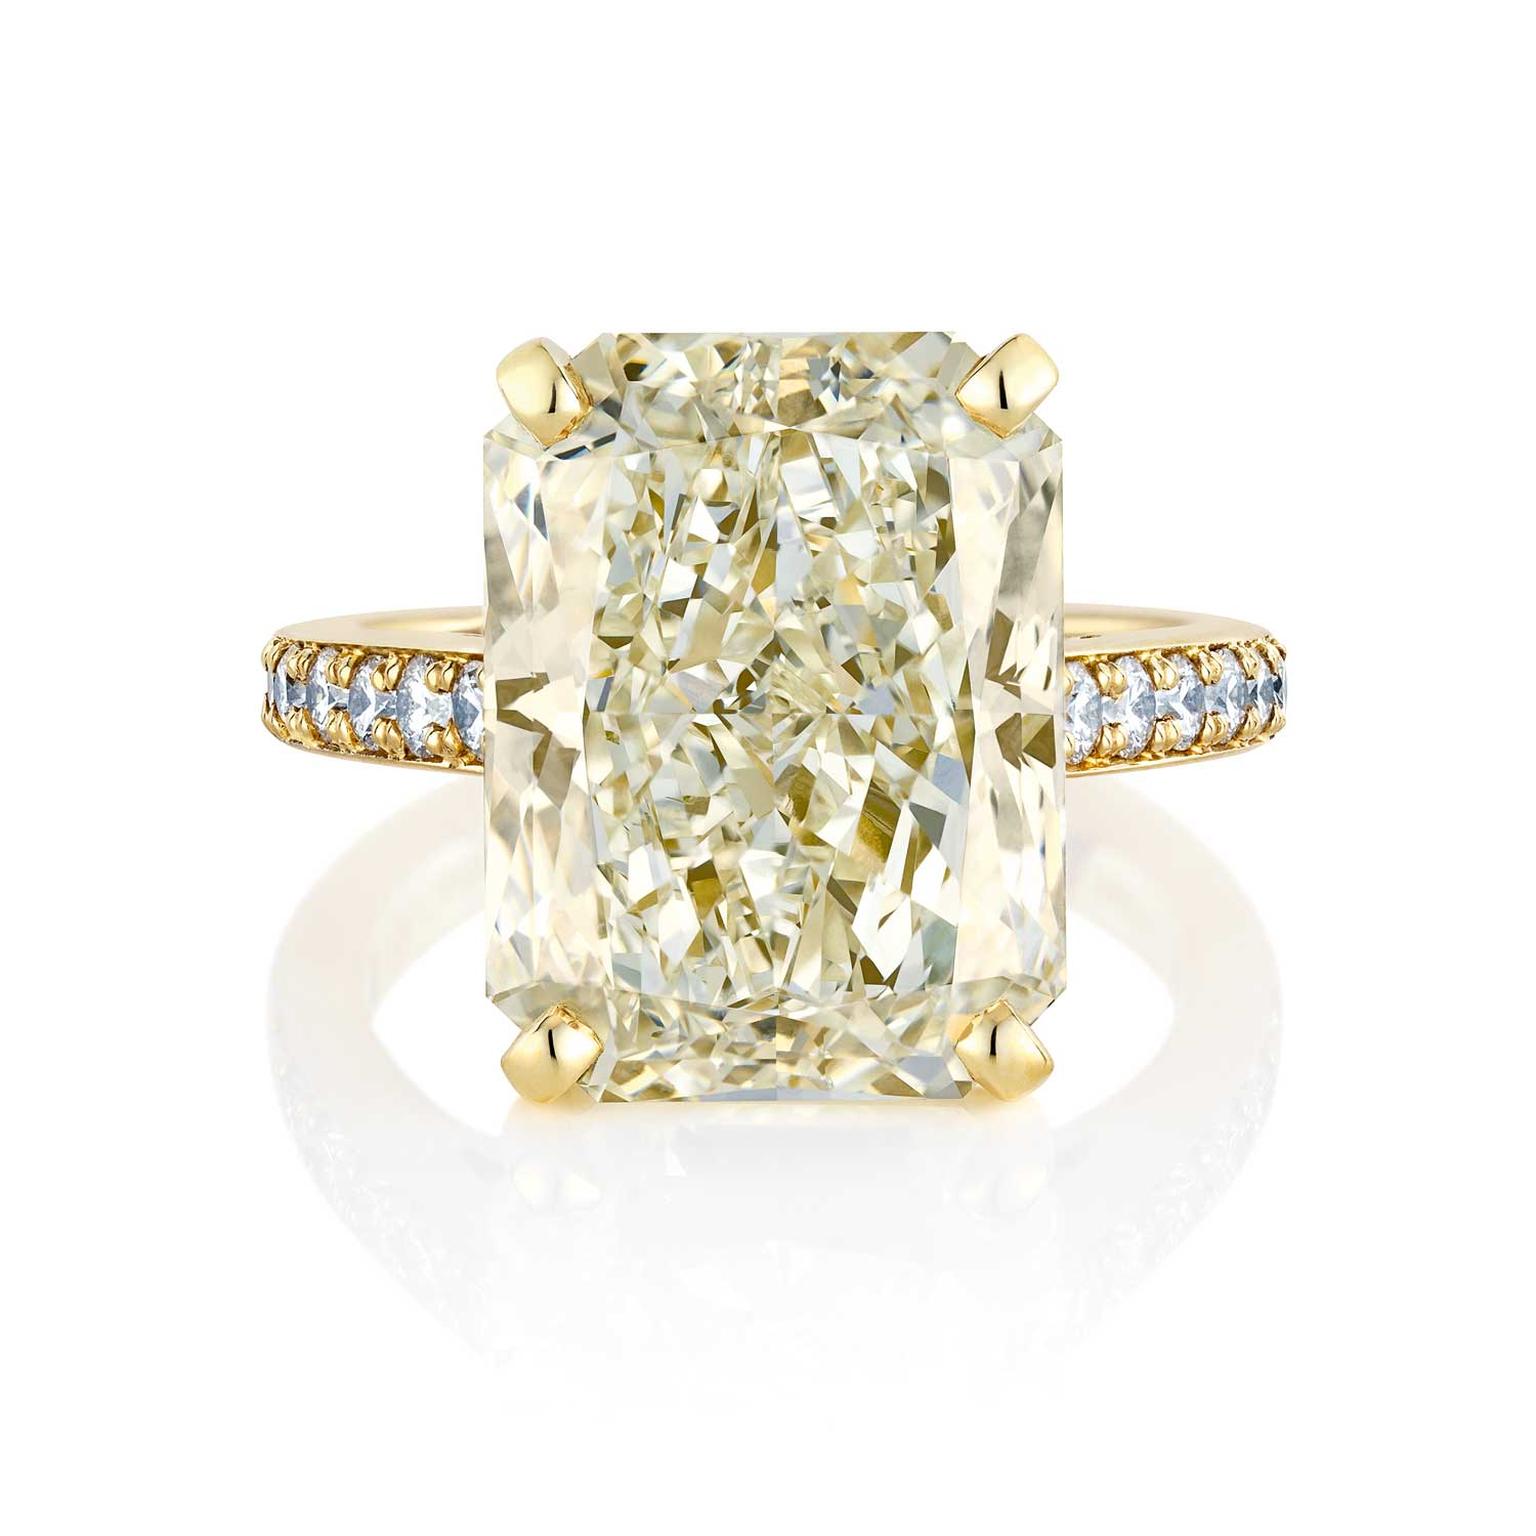 11.77ct radiant-cut W-colour white diamond set atop the De Beers Old Bond Street ring